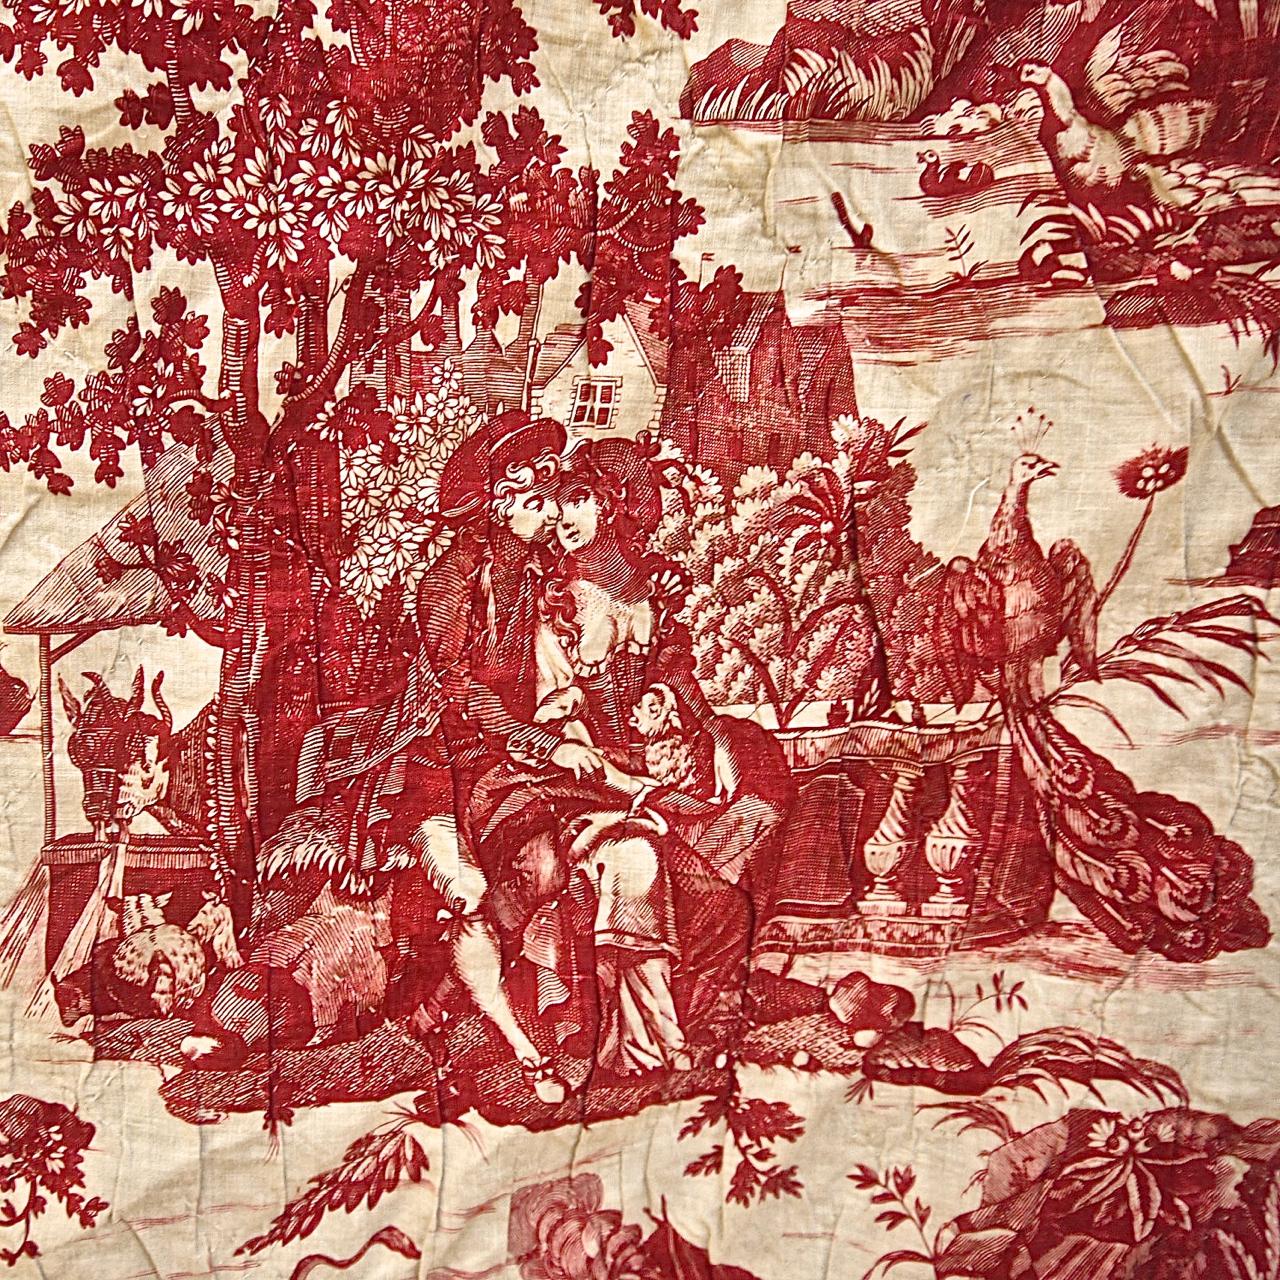 Red Toile de Jouy Cotton Panel French, 18th Century For Sale 4